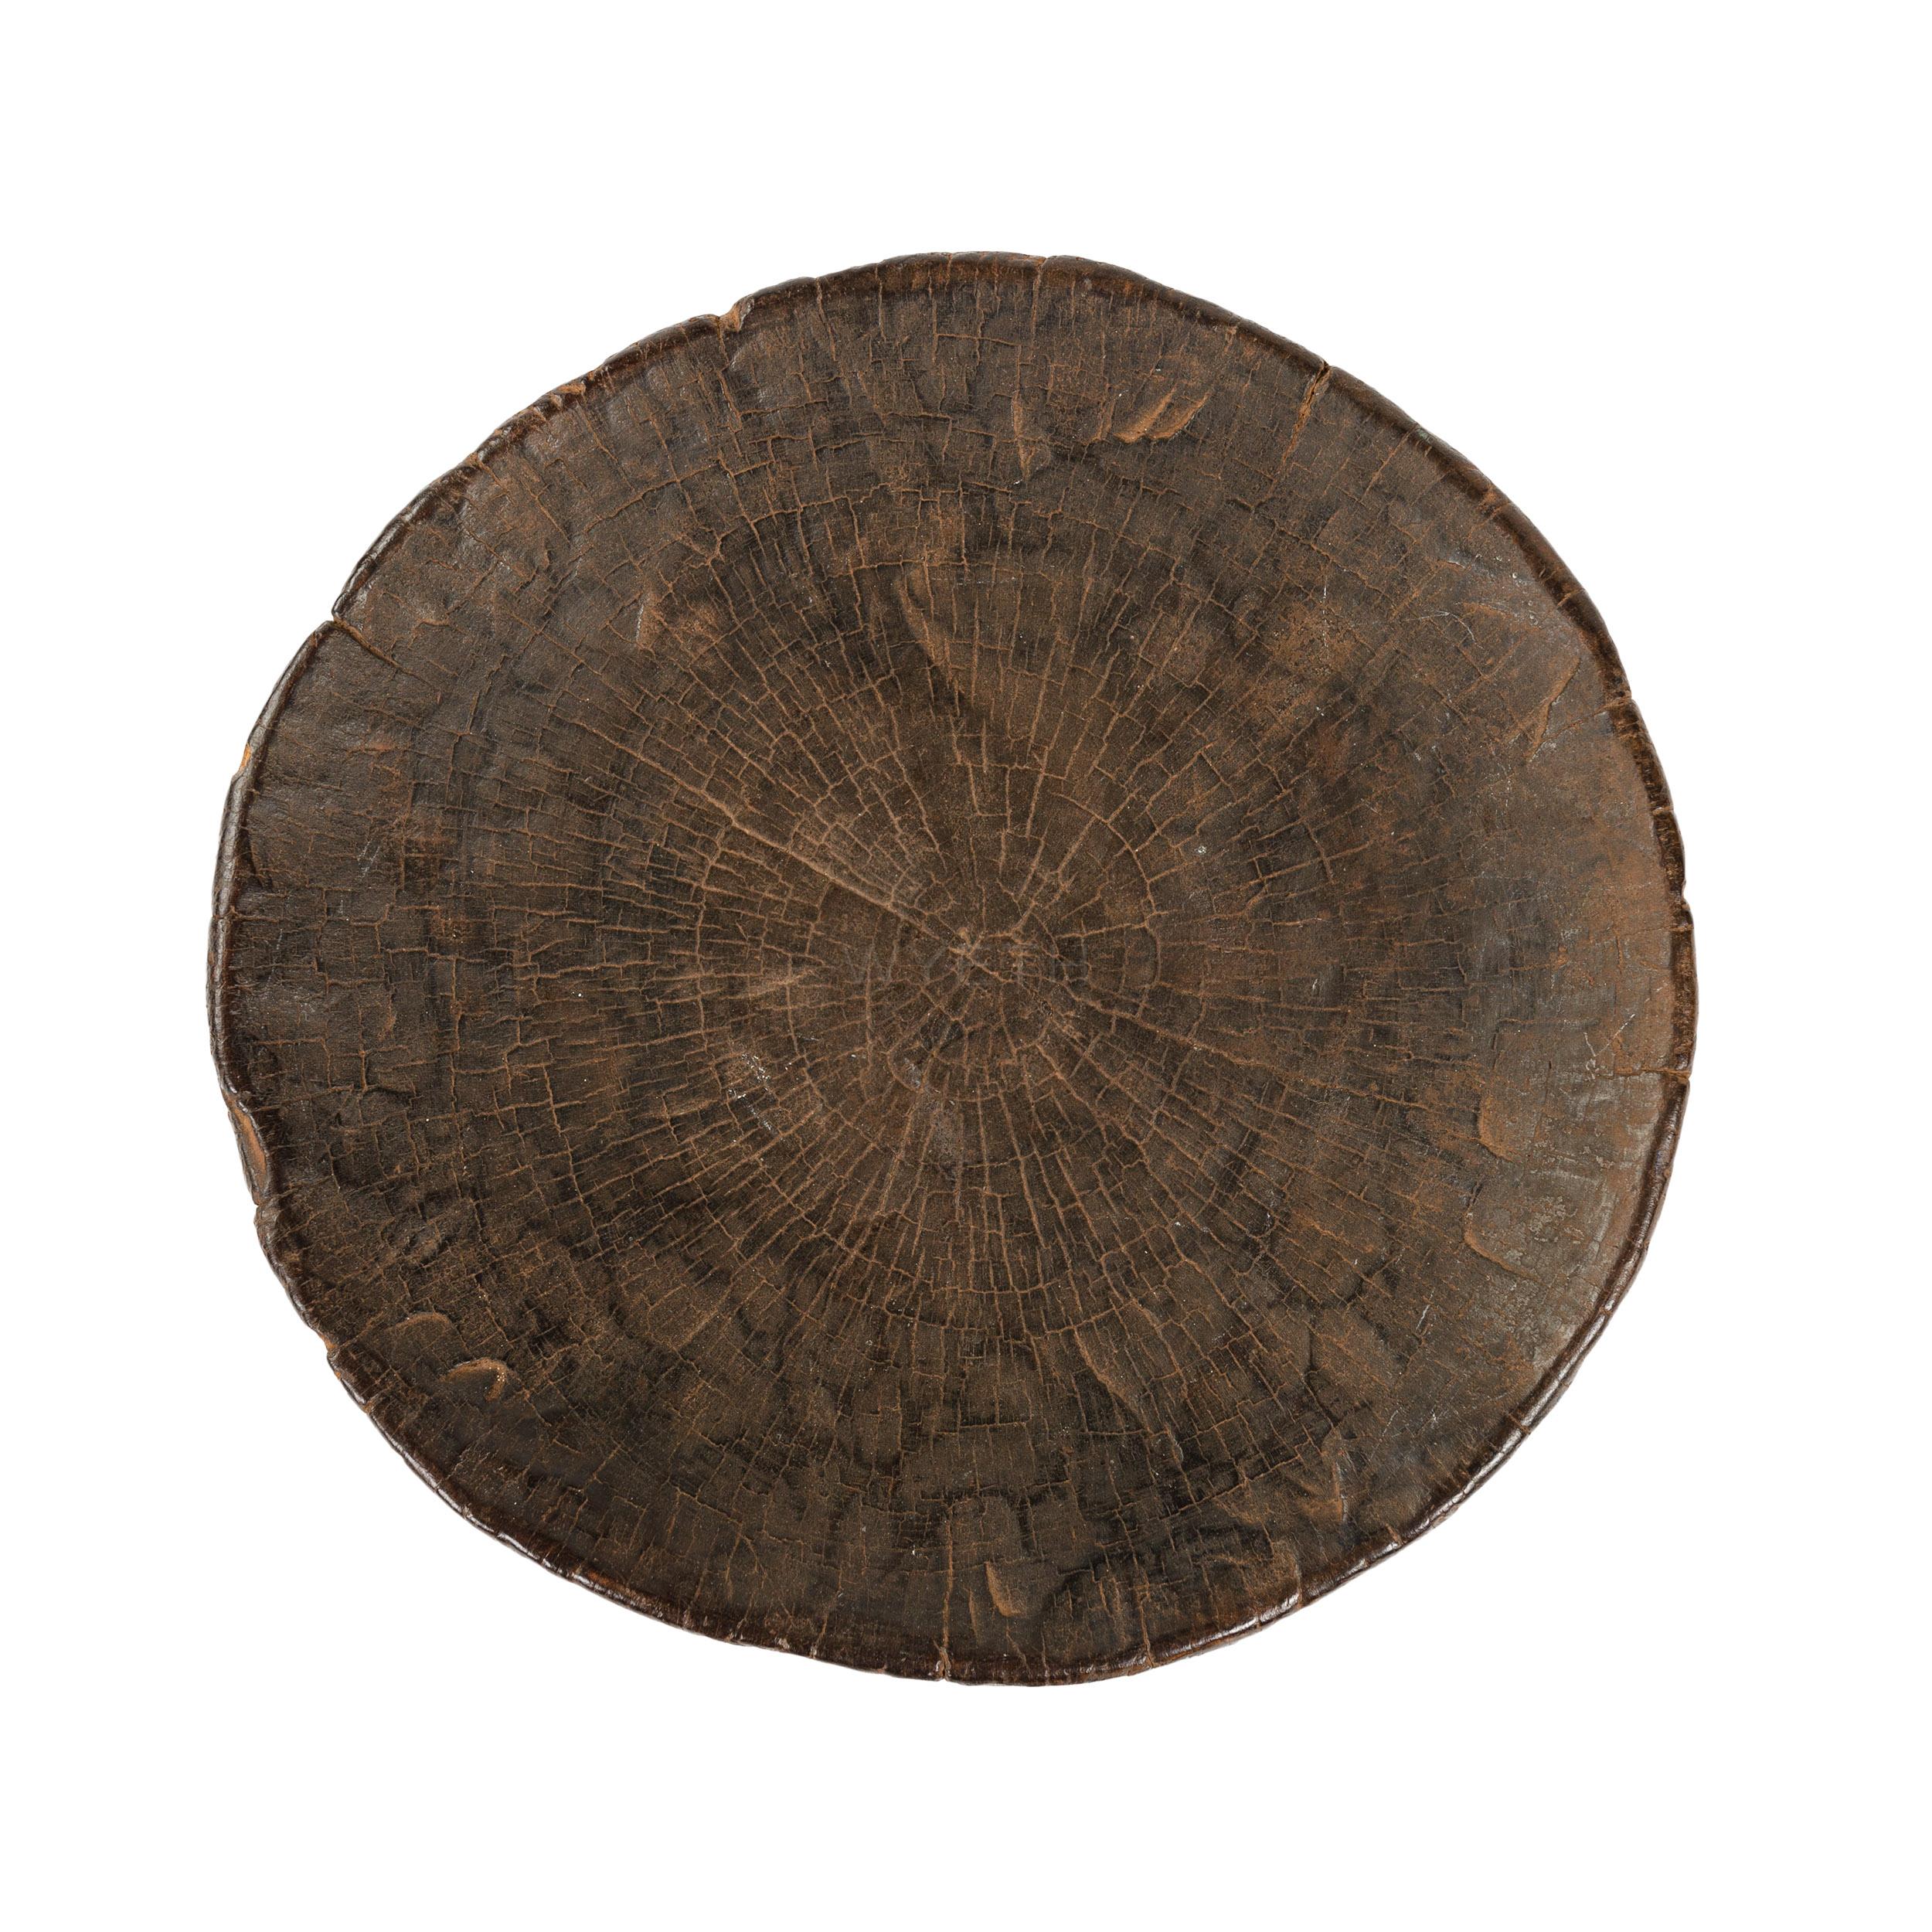 A stool carved from a hollowed-out log section, with a rectangular piercing bisected by a diamond-shaped head motif.